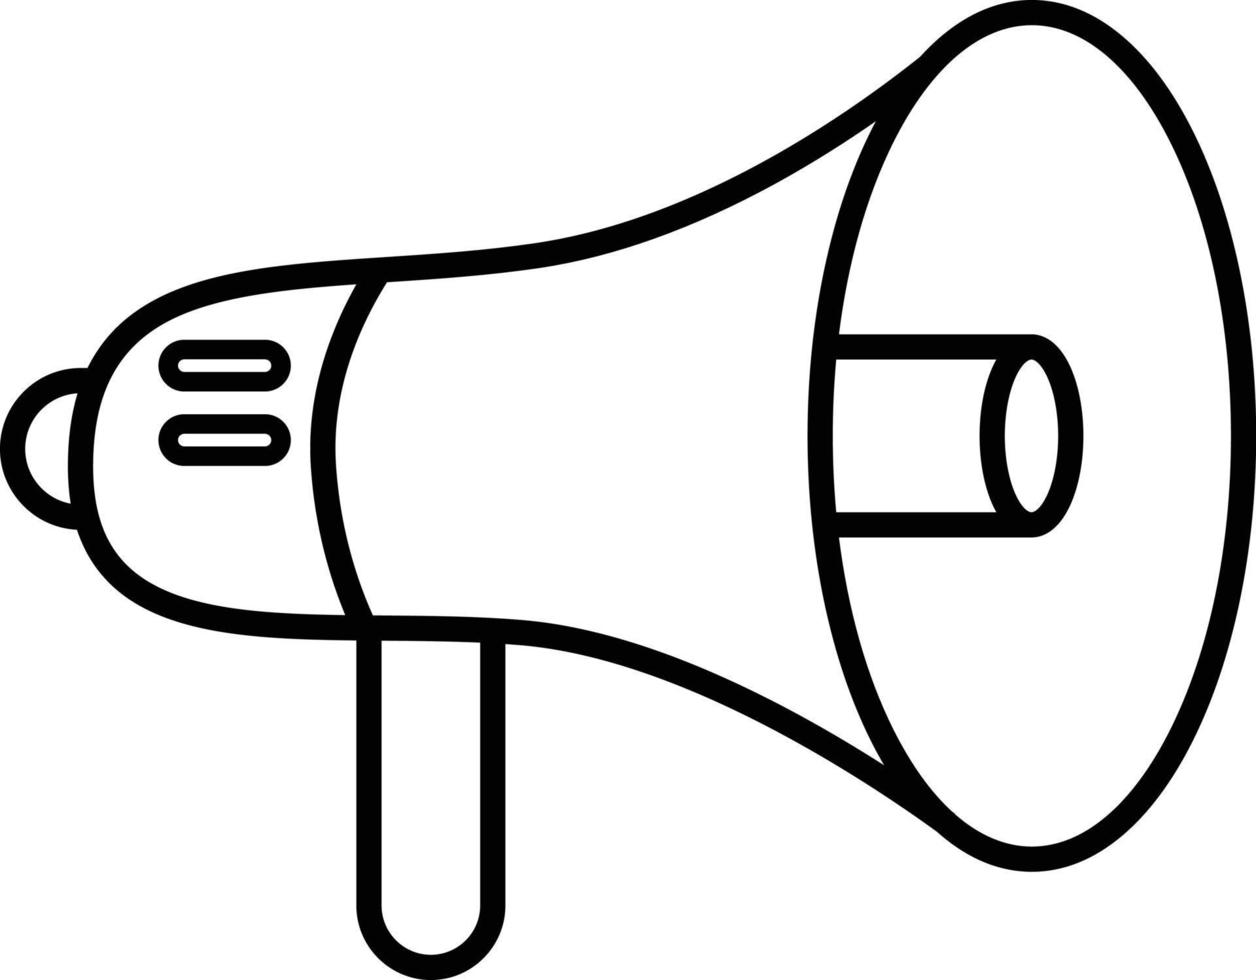 megaphone line art icon vector isolated with white background